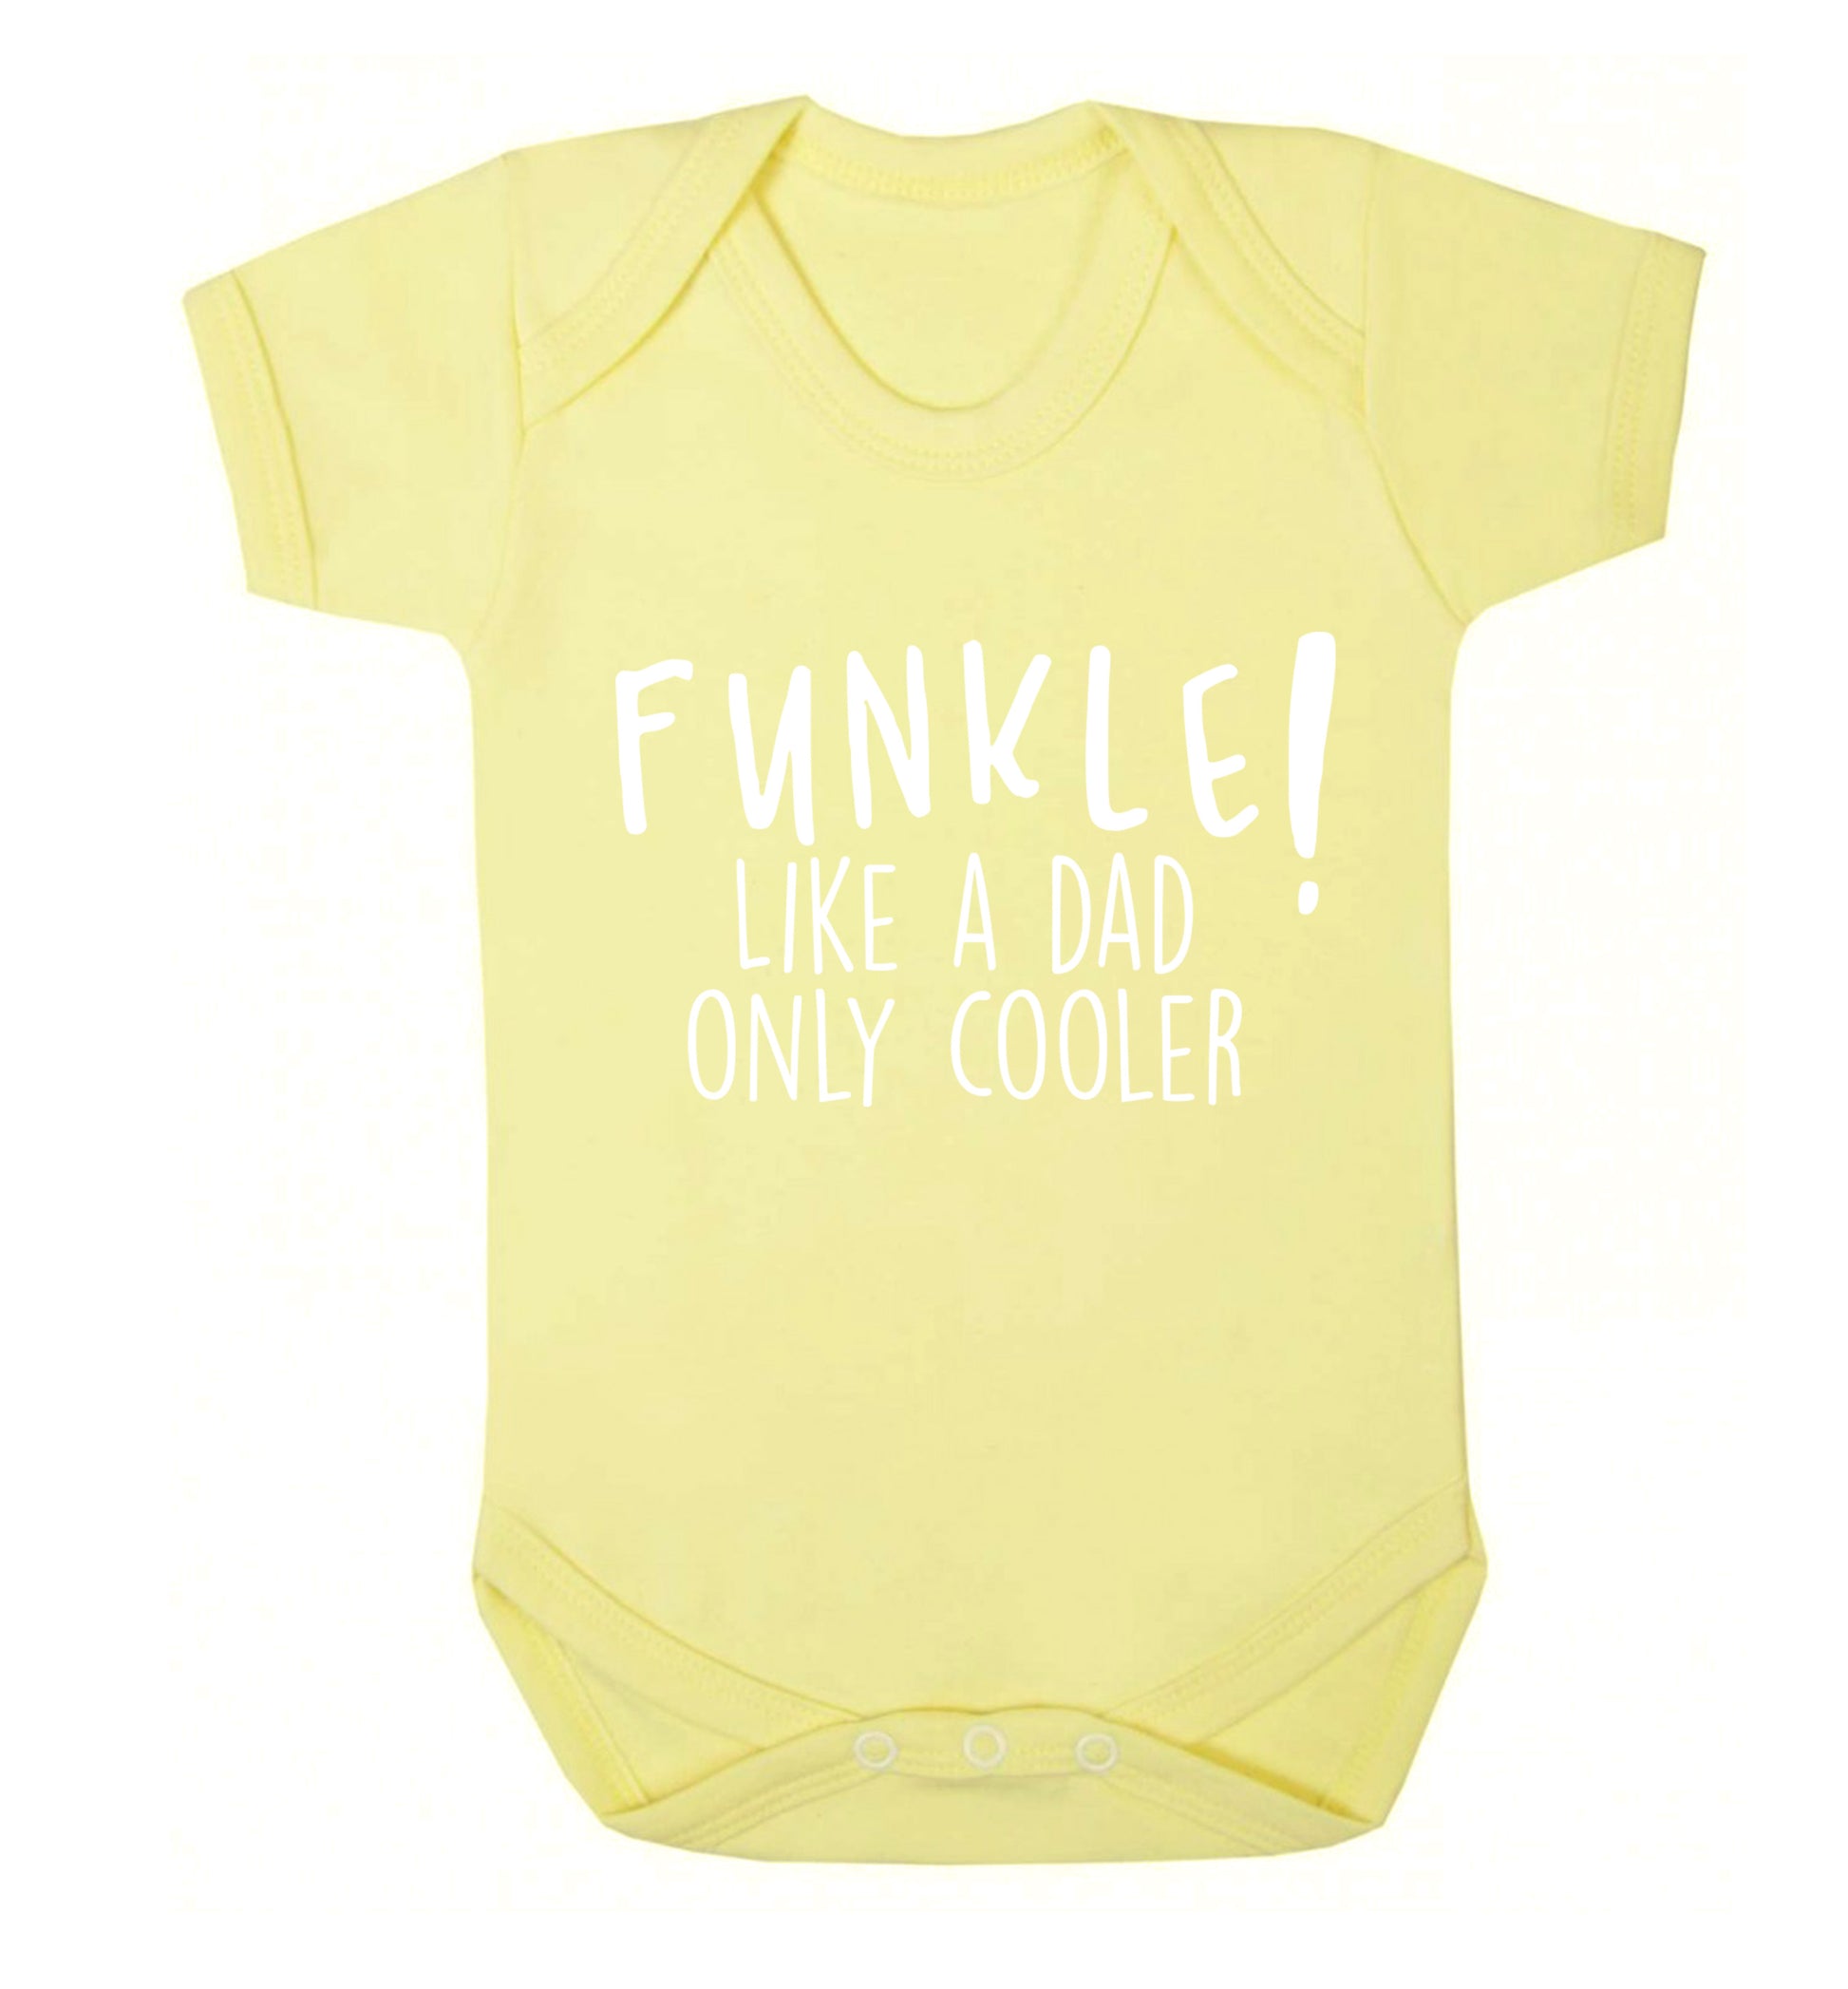 Funkle Like a Dad Only Cooler Baby Vest pale yellow 18-24 months